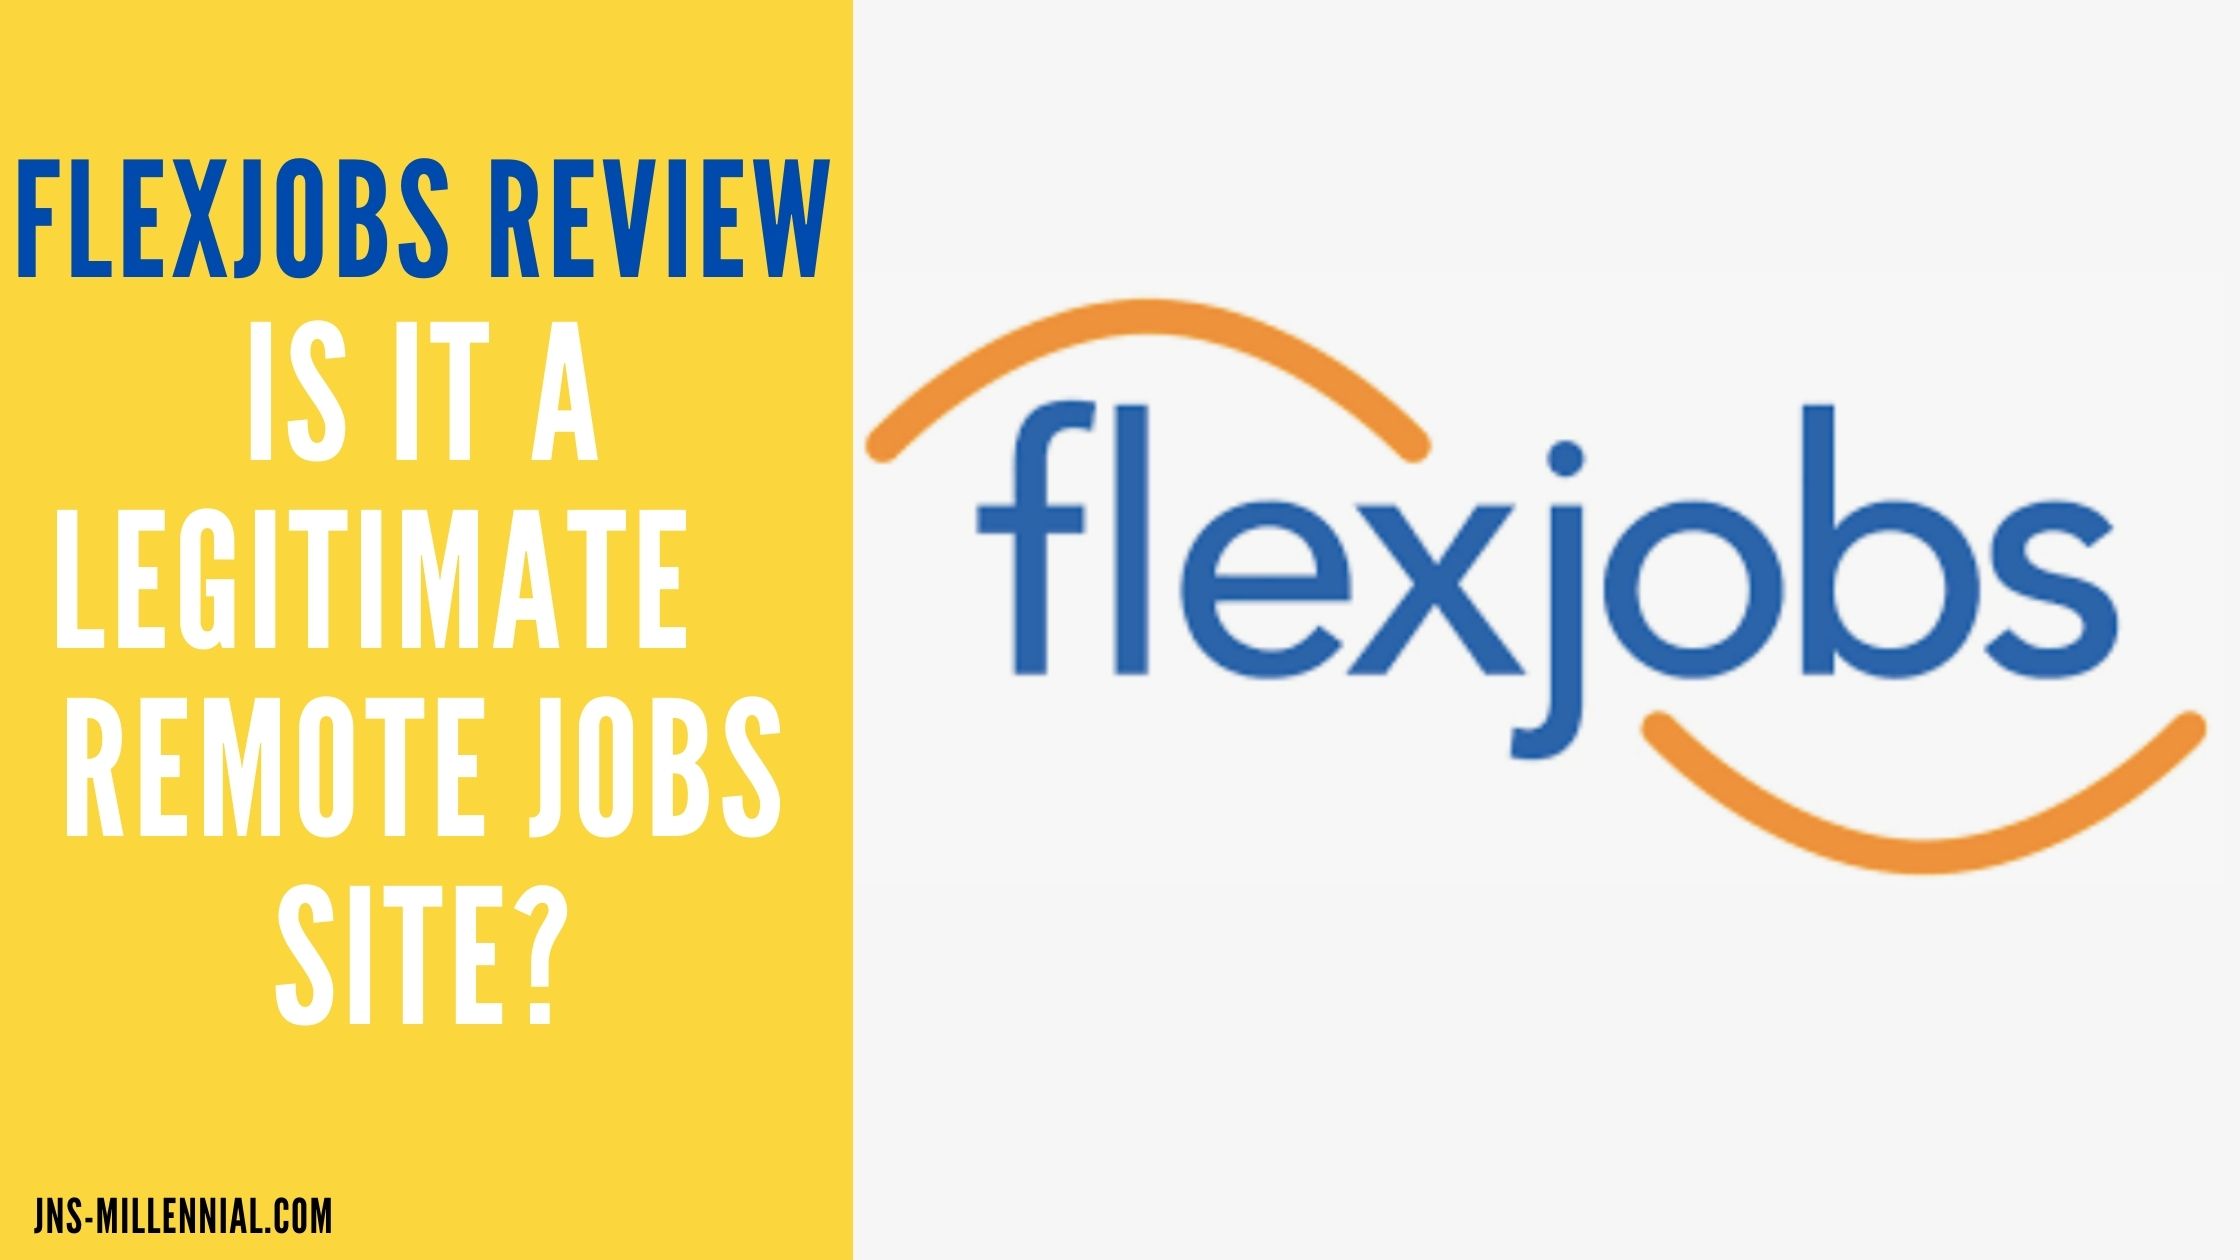 Flexjobs Review: Is It a Legitimate Remote Jobs Site?